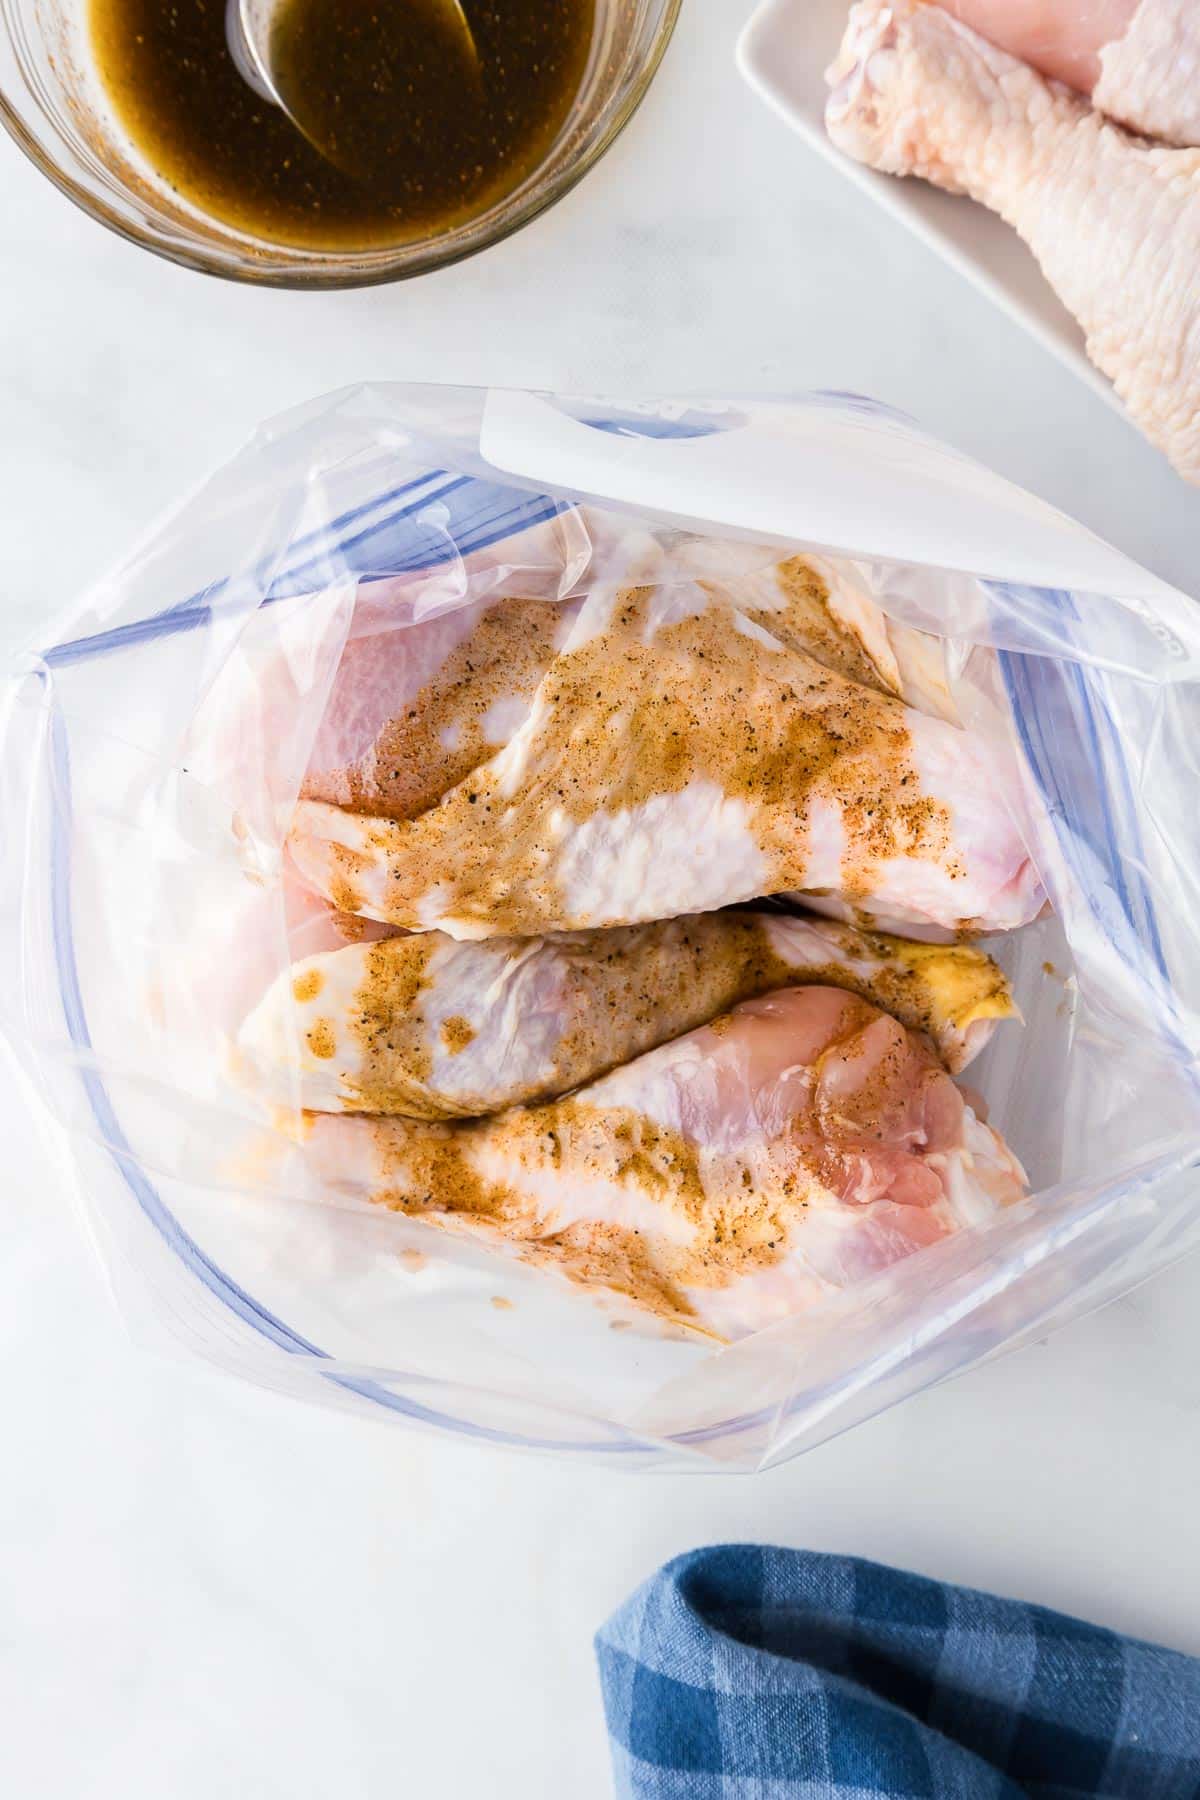 Raw chicken legs in a zip-top bag seasoned with some marinade on a kitchen counter, with a bowl of marinade nearby.